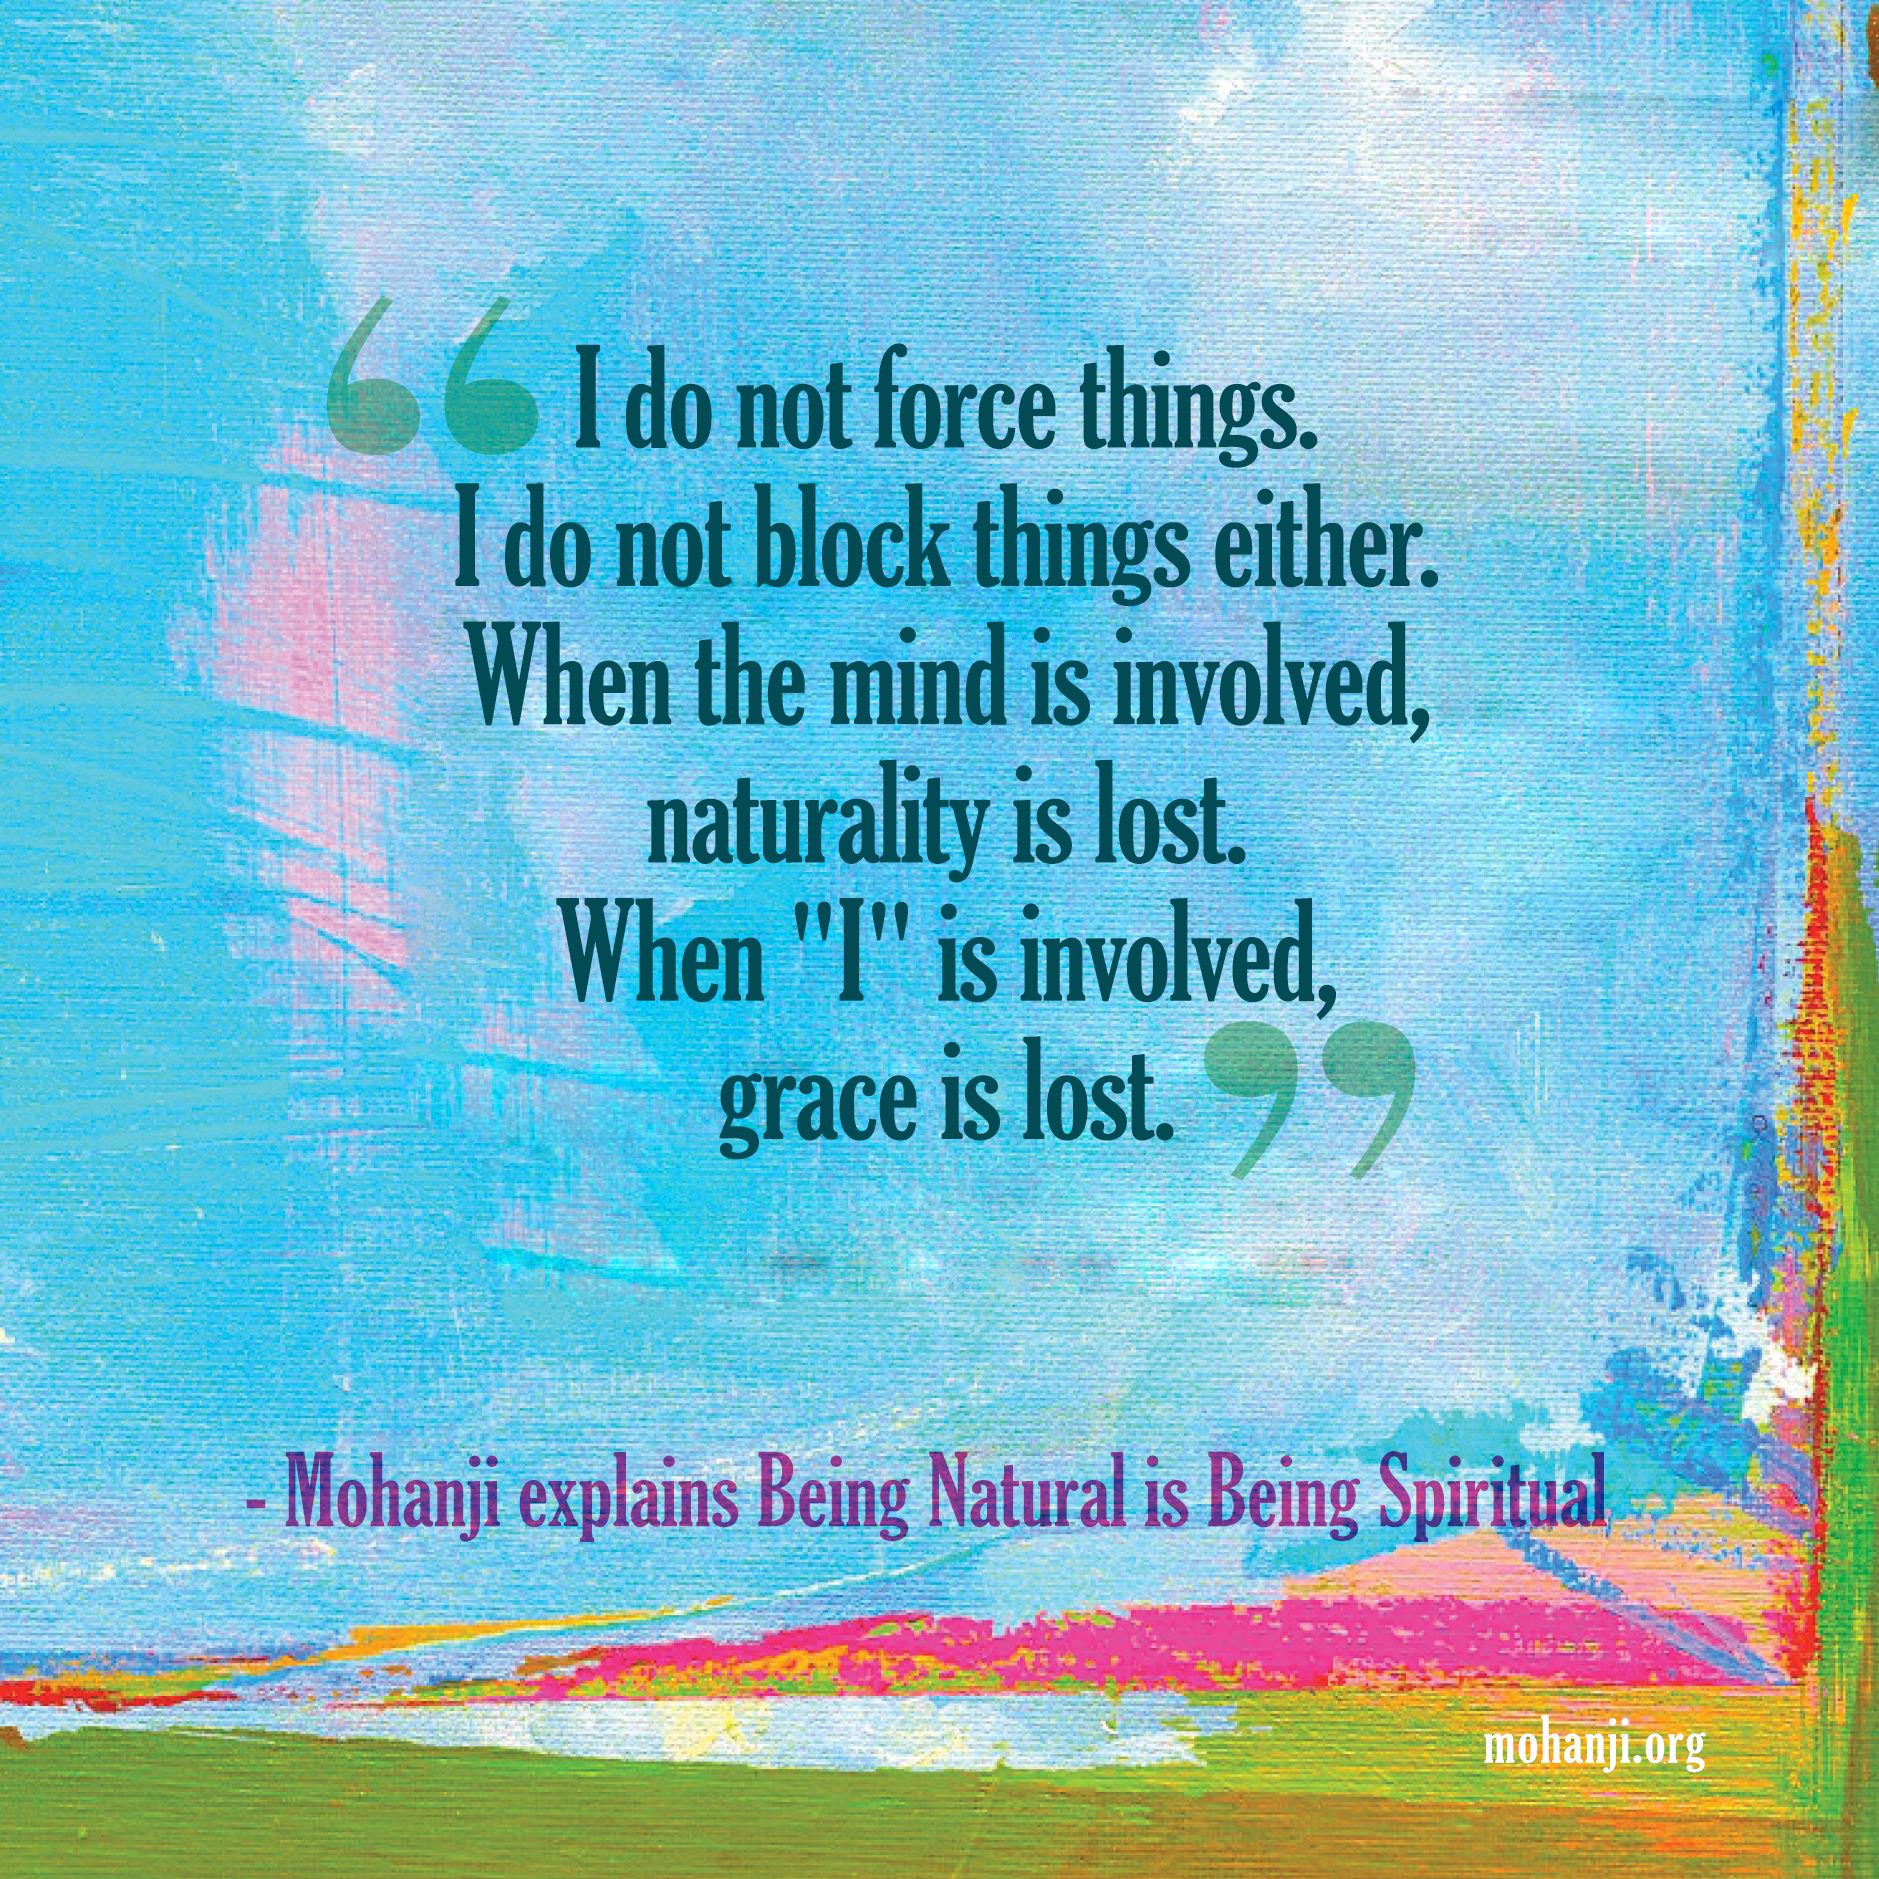 Mohanji quote - Being natural is being spiritual-explanation